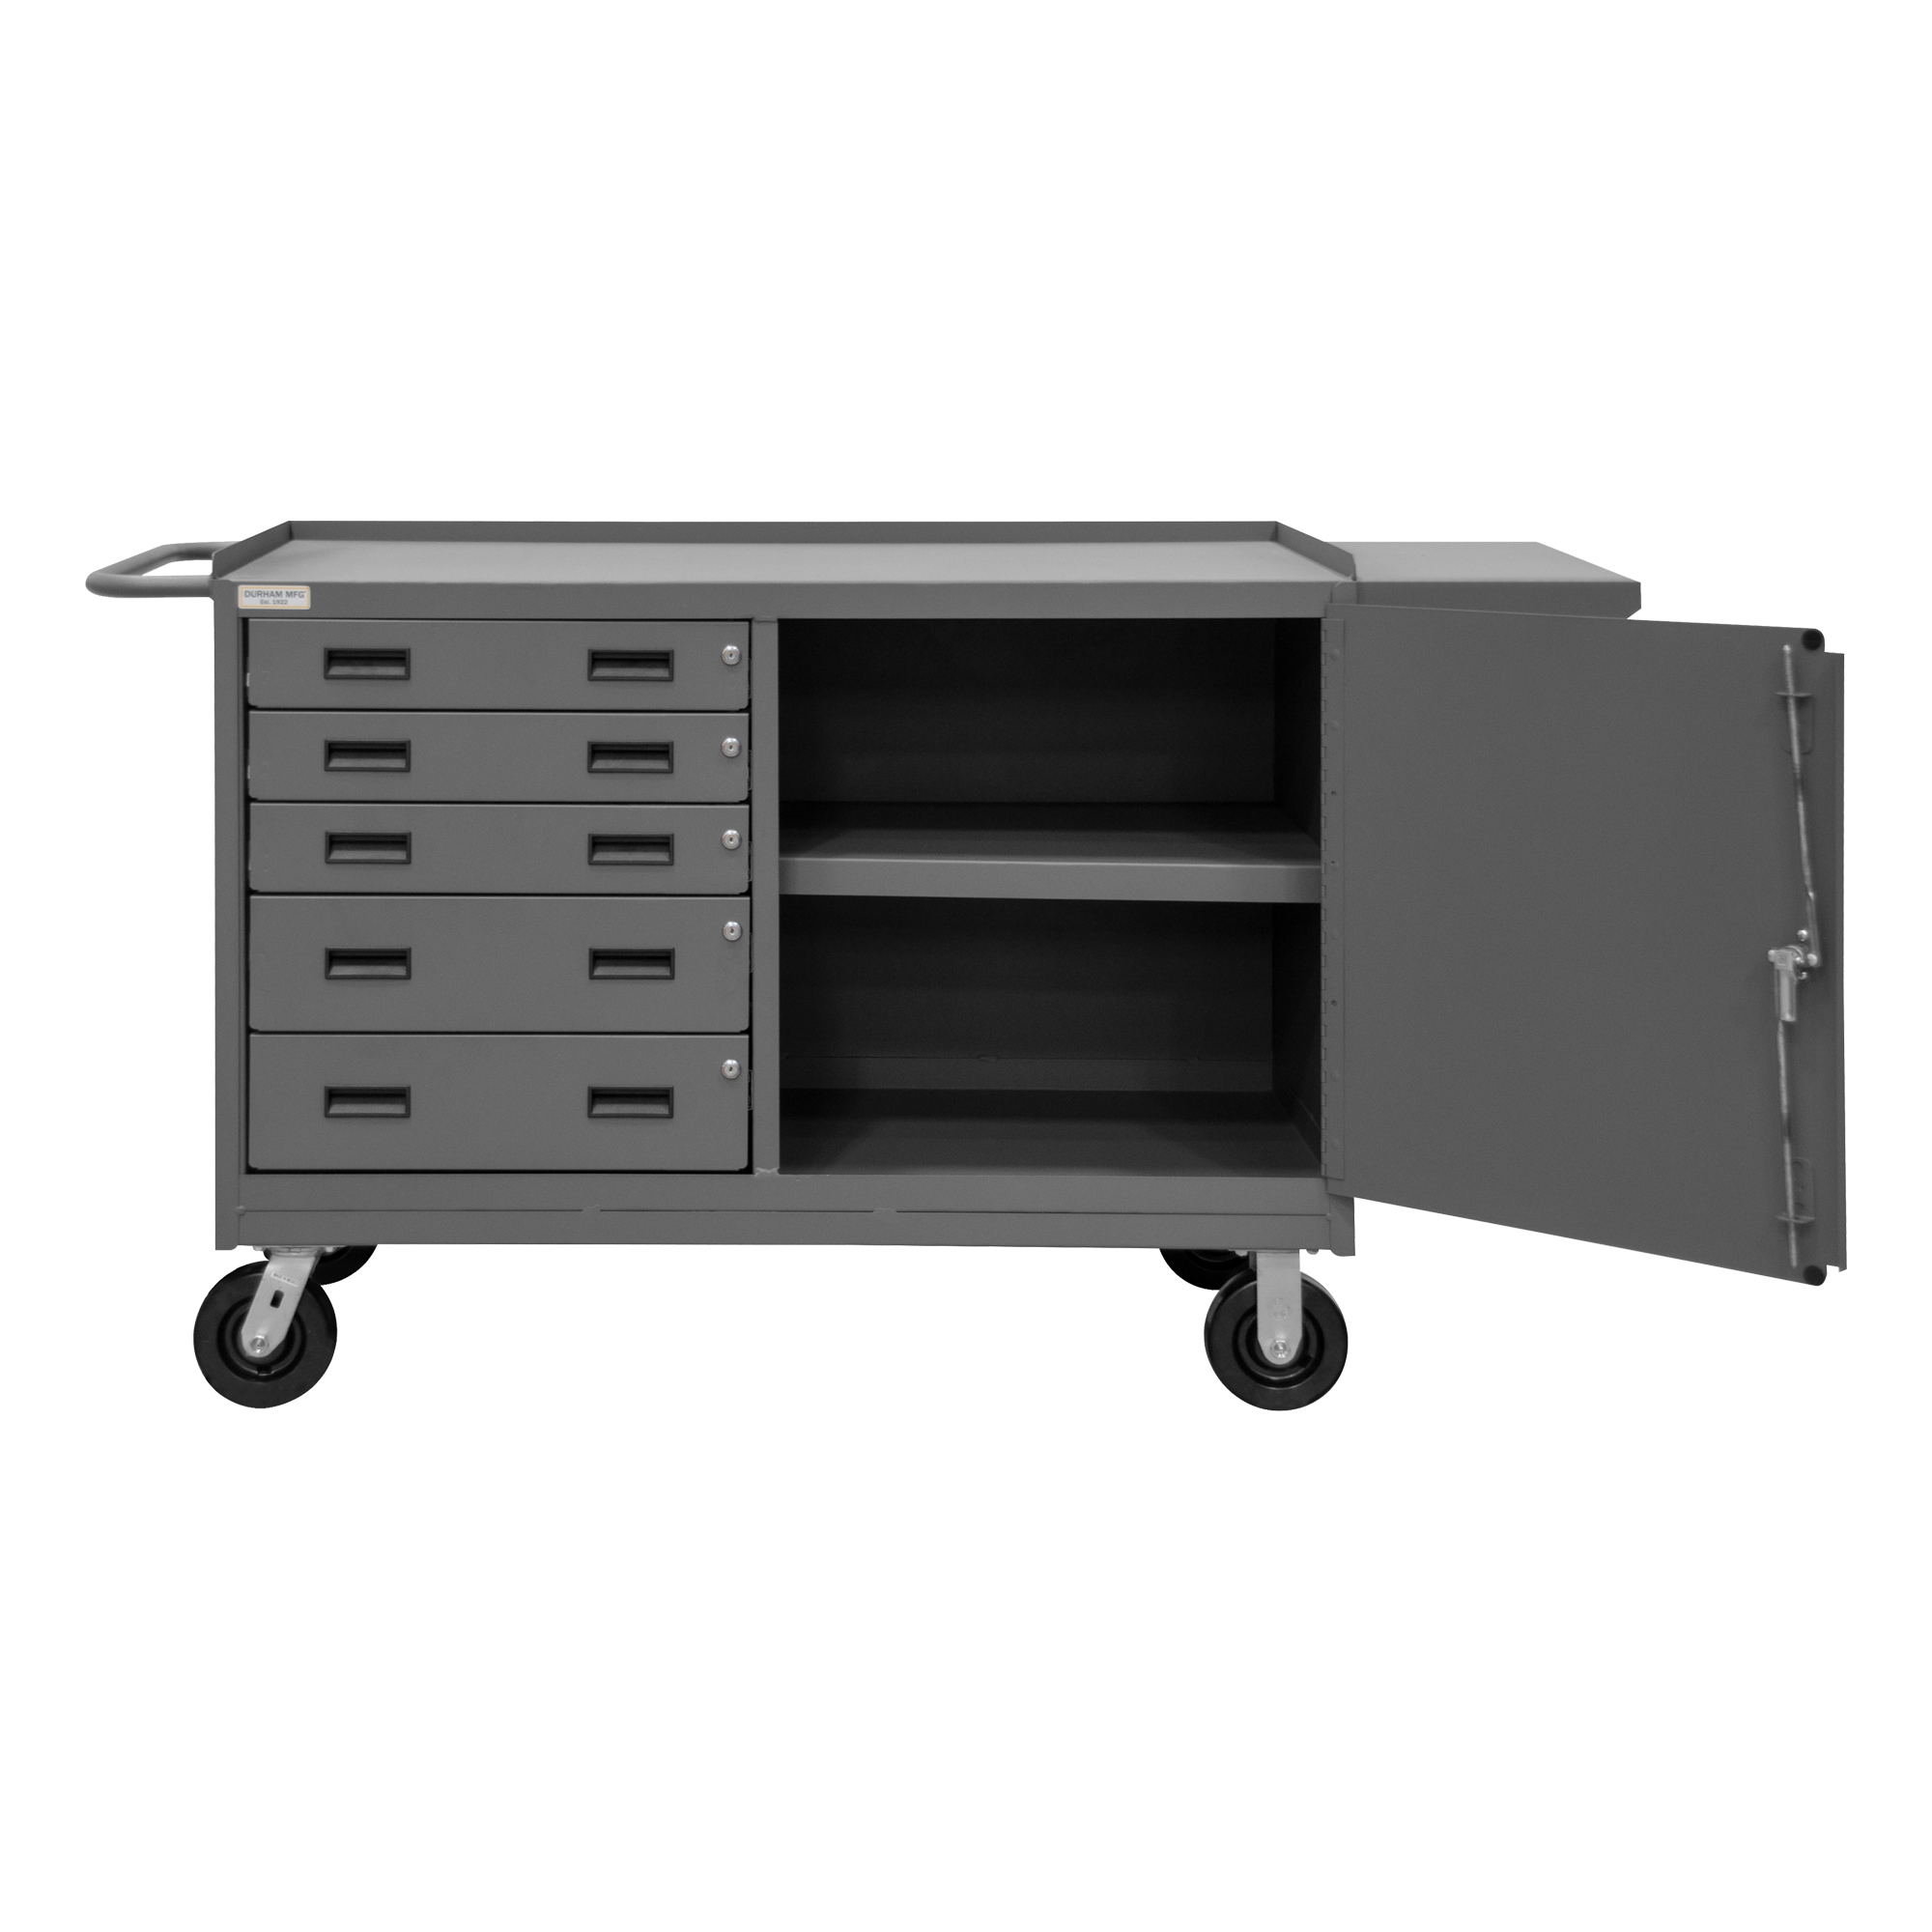 Hard Board Top 24-1/4 x 42-1/8 x 36-3/8 Durham Mobile Bench Cabinet 